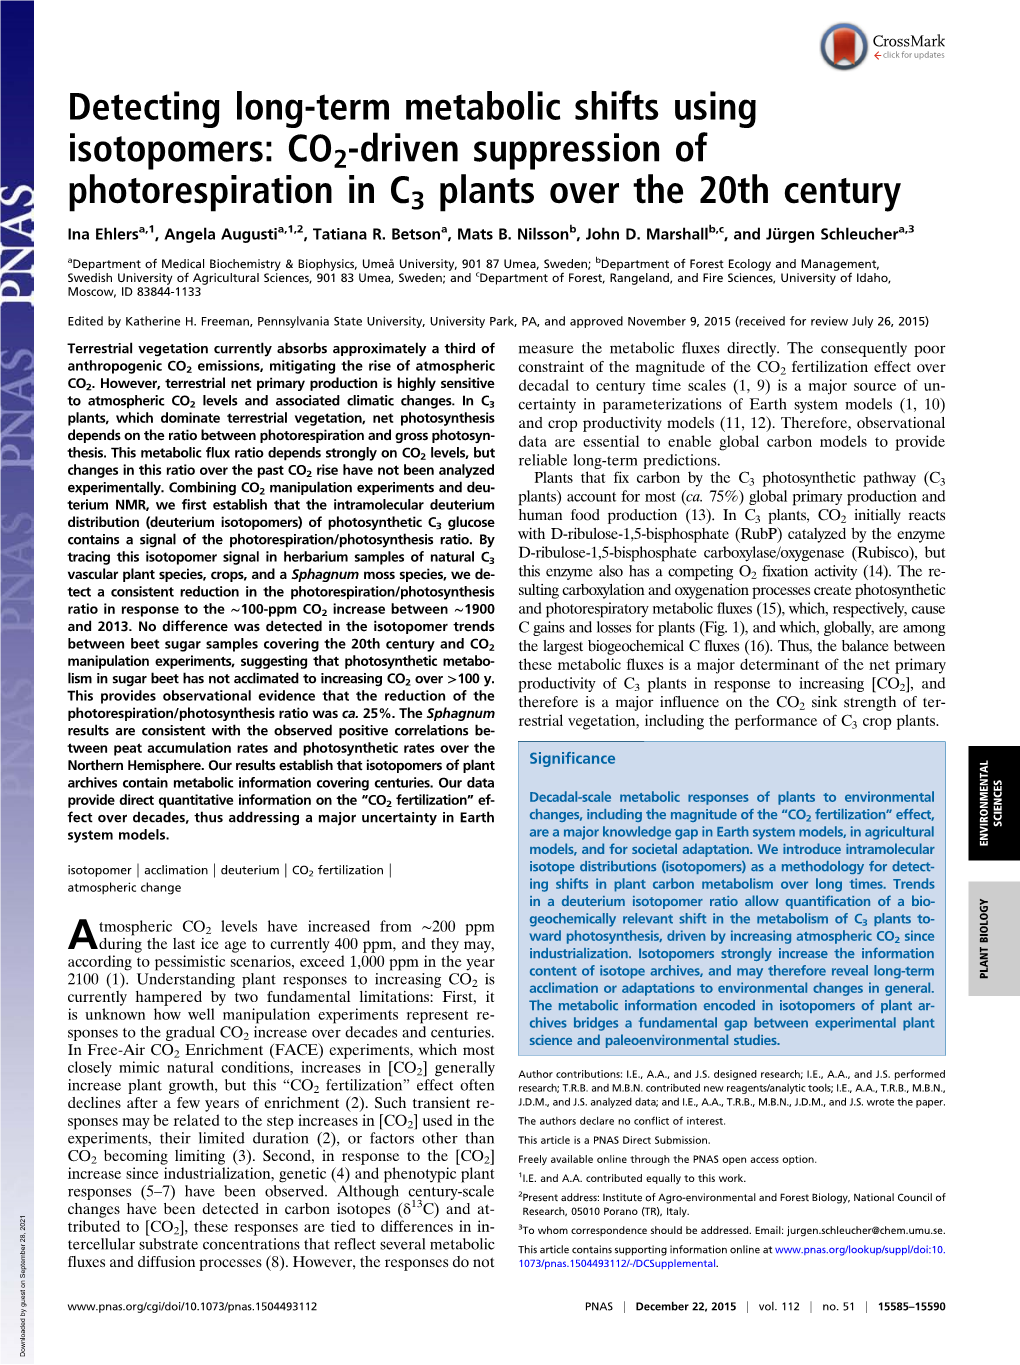 CO2-Driven Suppression of Photorespiration in C3 Plants Over the 20Th Century Ina Ehlersa,1, Angela Augustia,1,2, Tatiana R